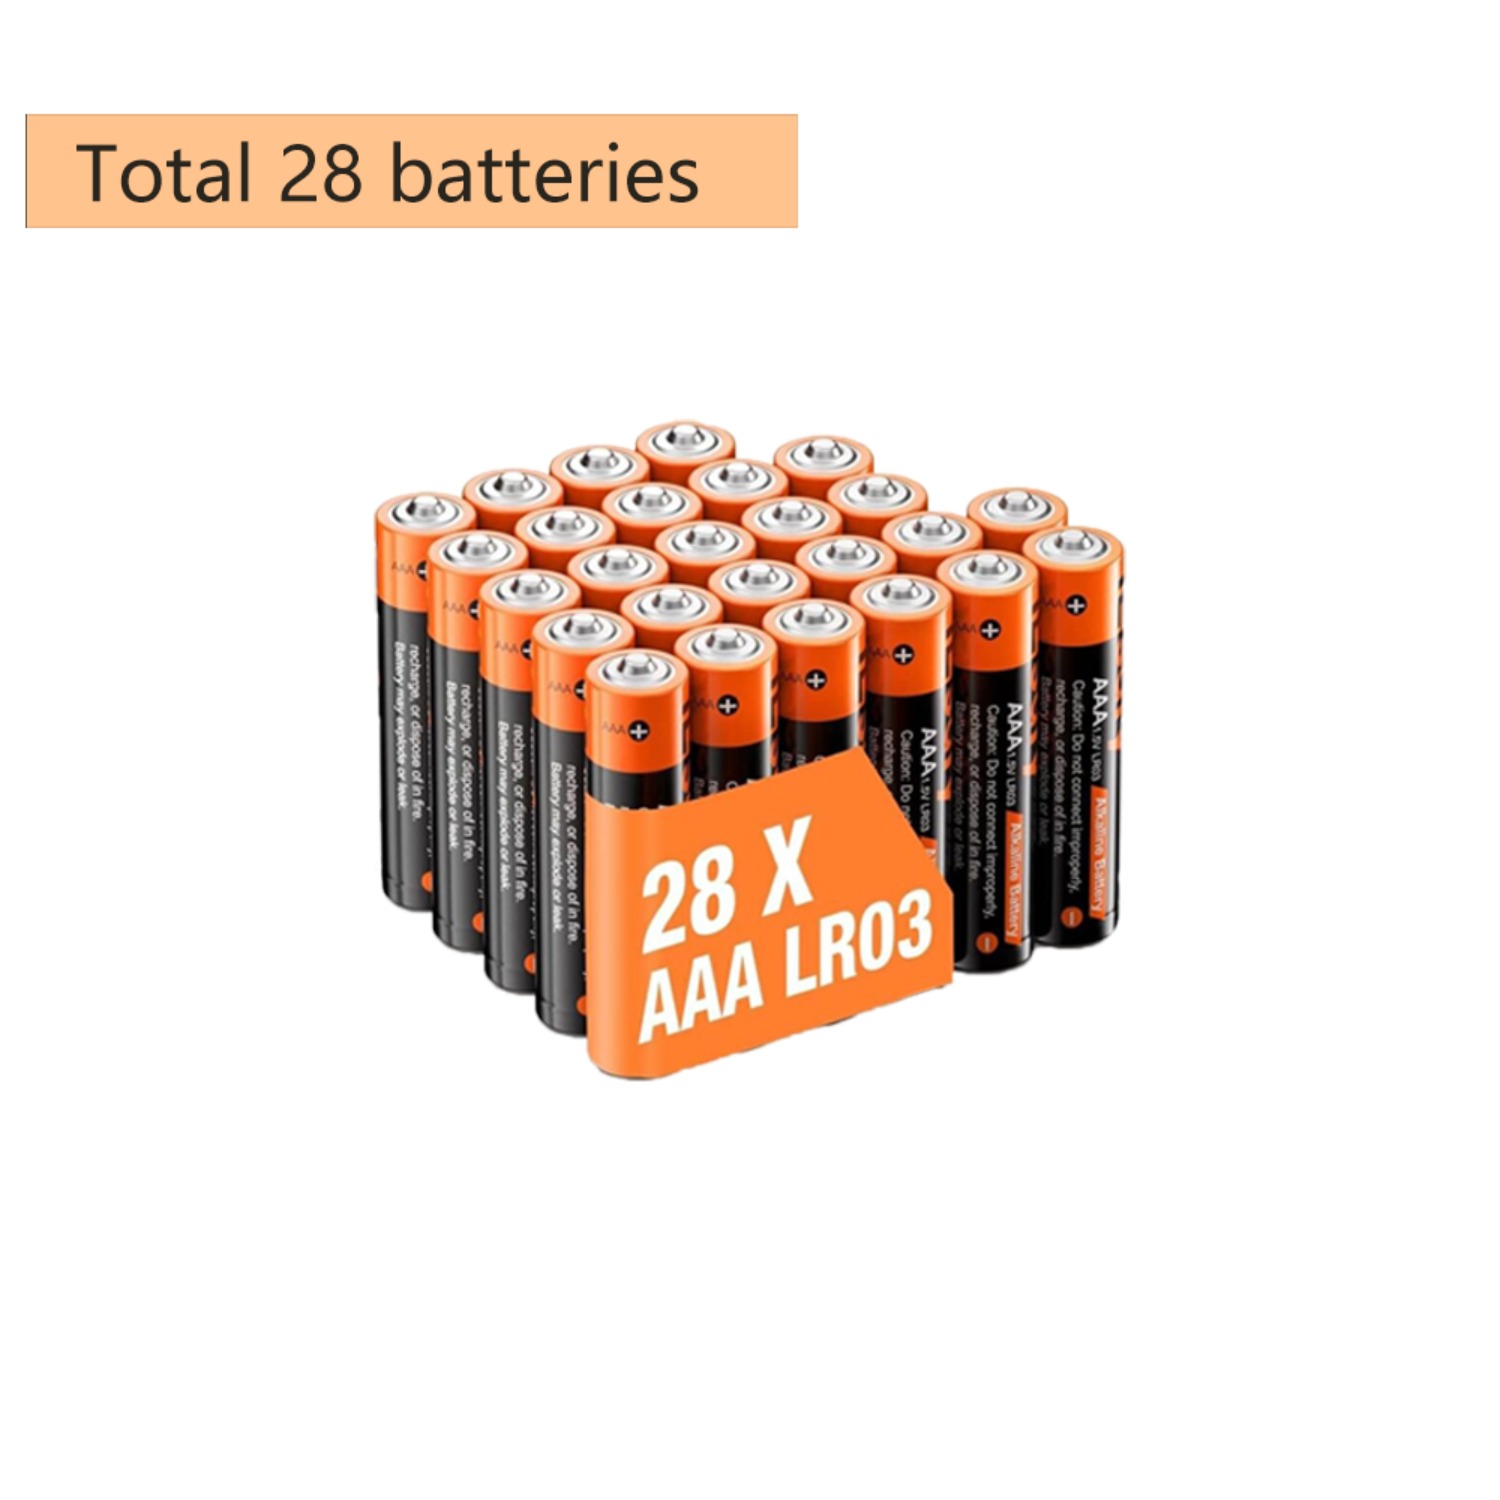 

28 Pcs, 1000 Mah Aaa Alkaline Battery, 1.5 Volts, High Performance, Safe And Reliable Alkaline Battery